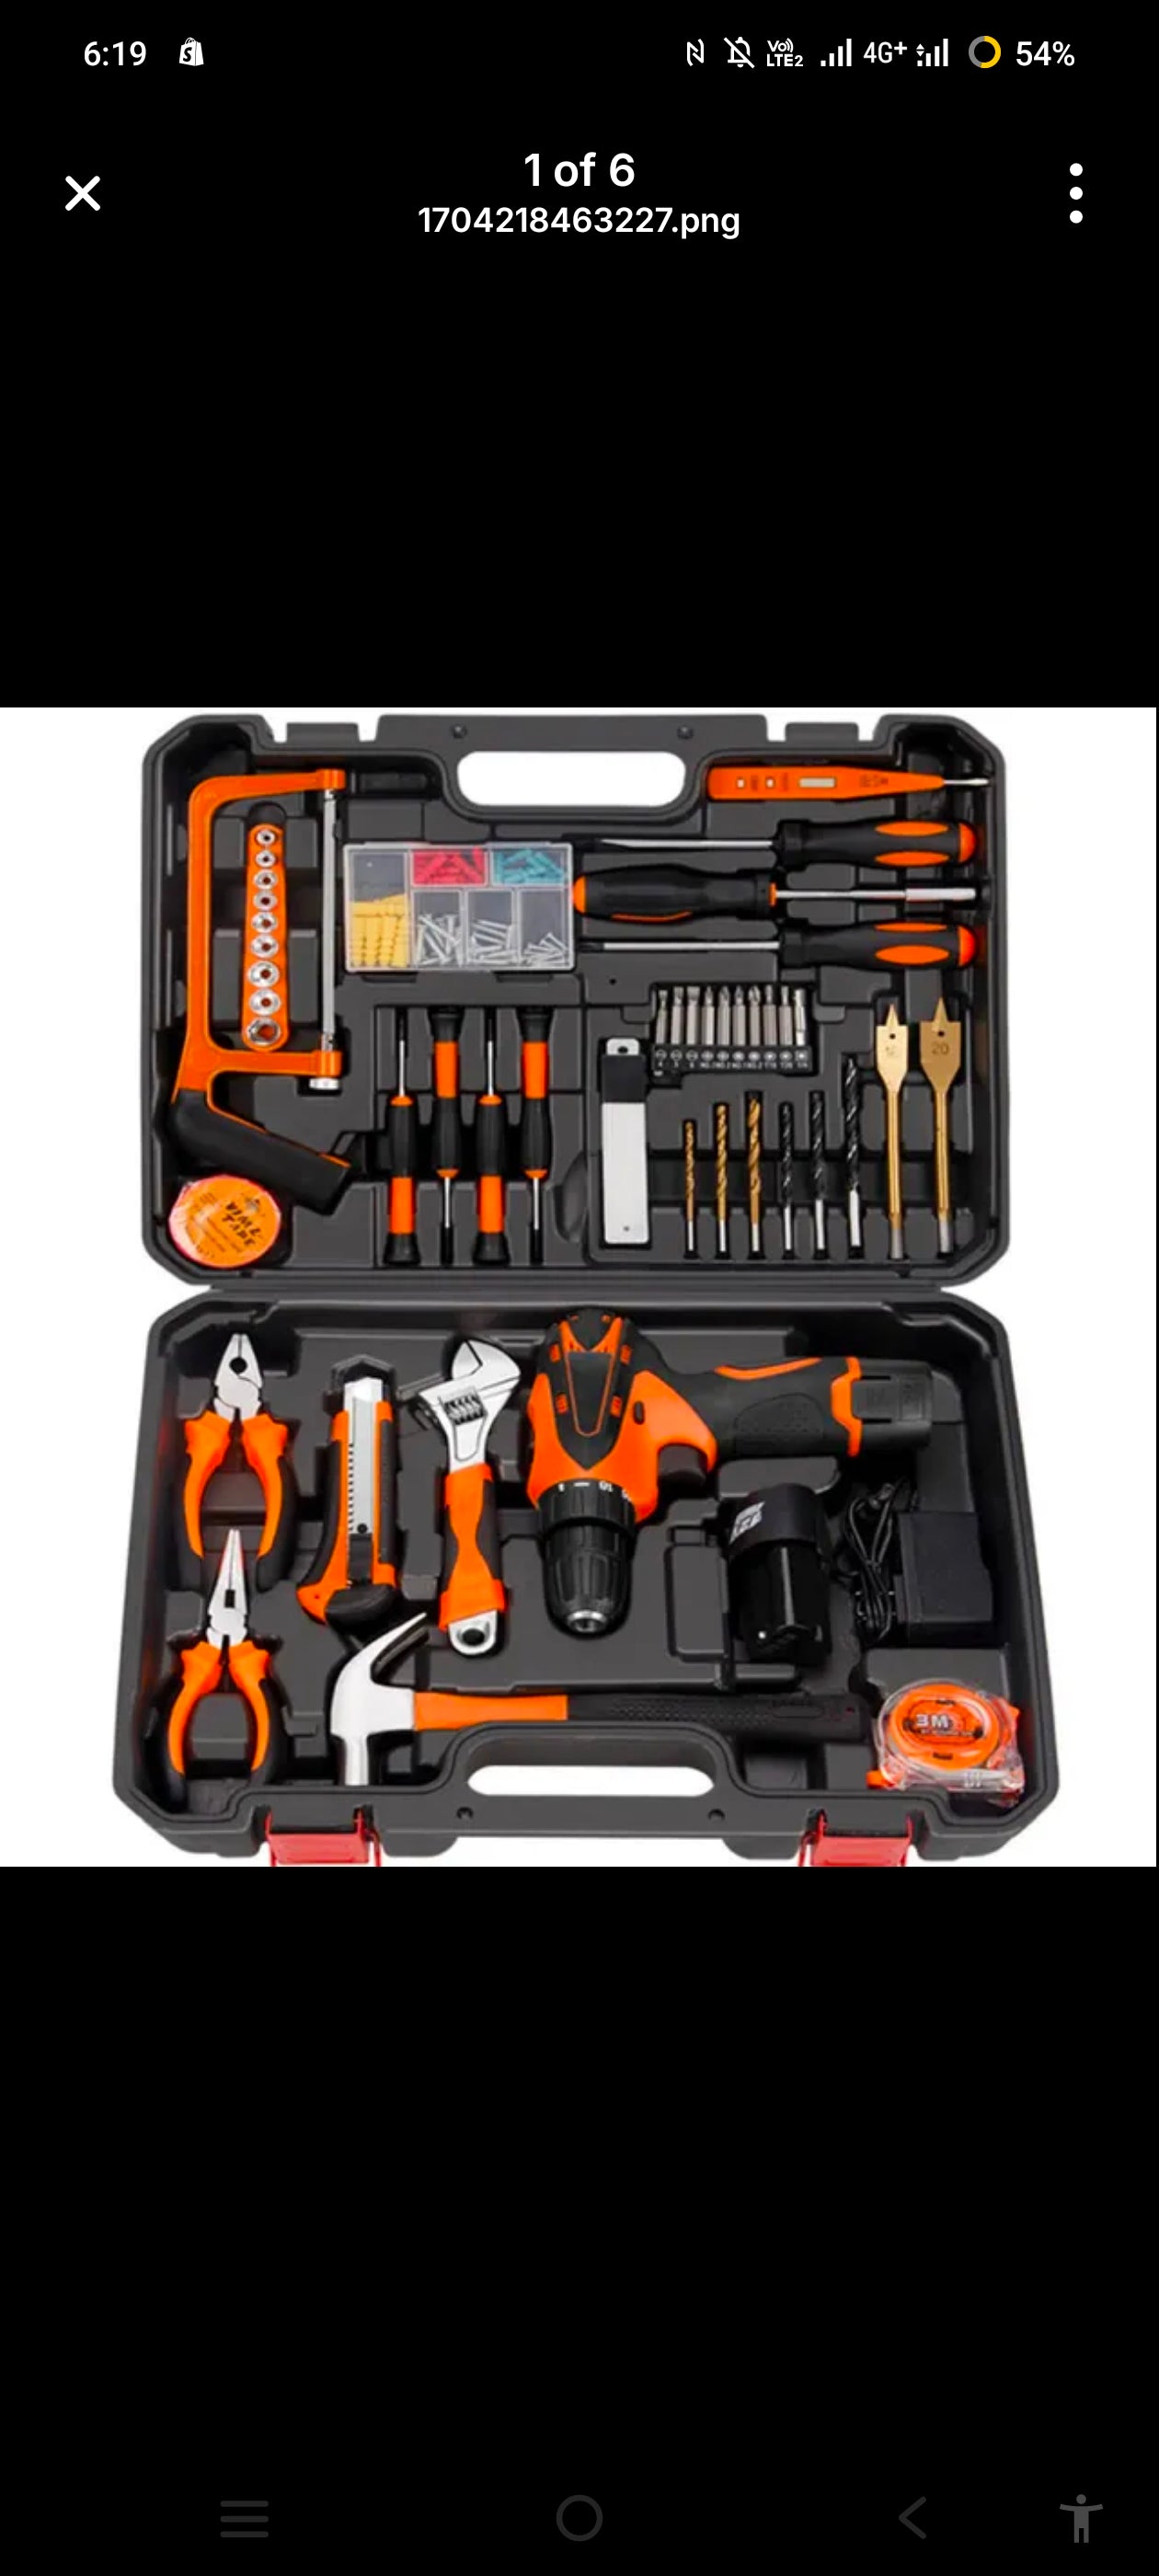 100 PC's Hardware Hand Tools Kit House Hold Screwdriver Plier Hammer Tool Box Set Case